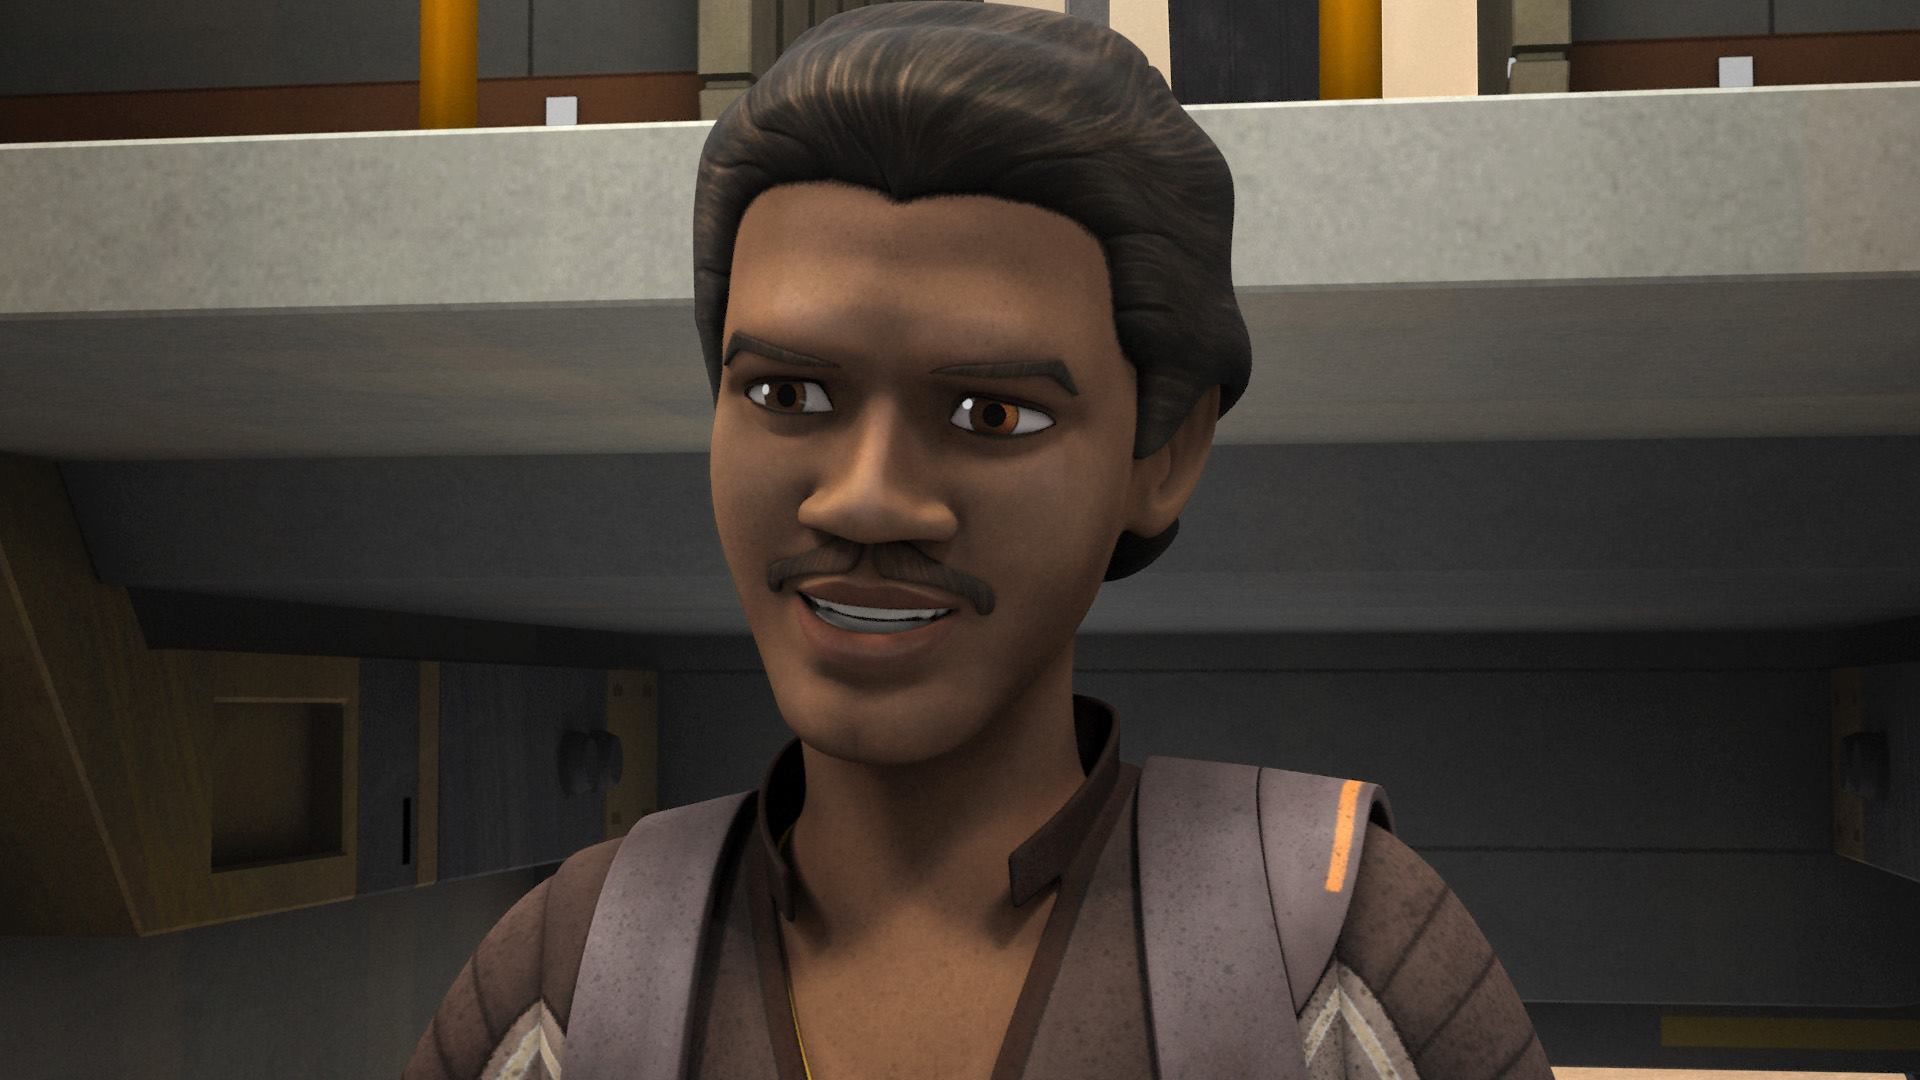 Lando Calrissian wins Chopper from Zeb by beating him in what game?